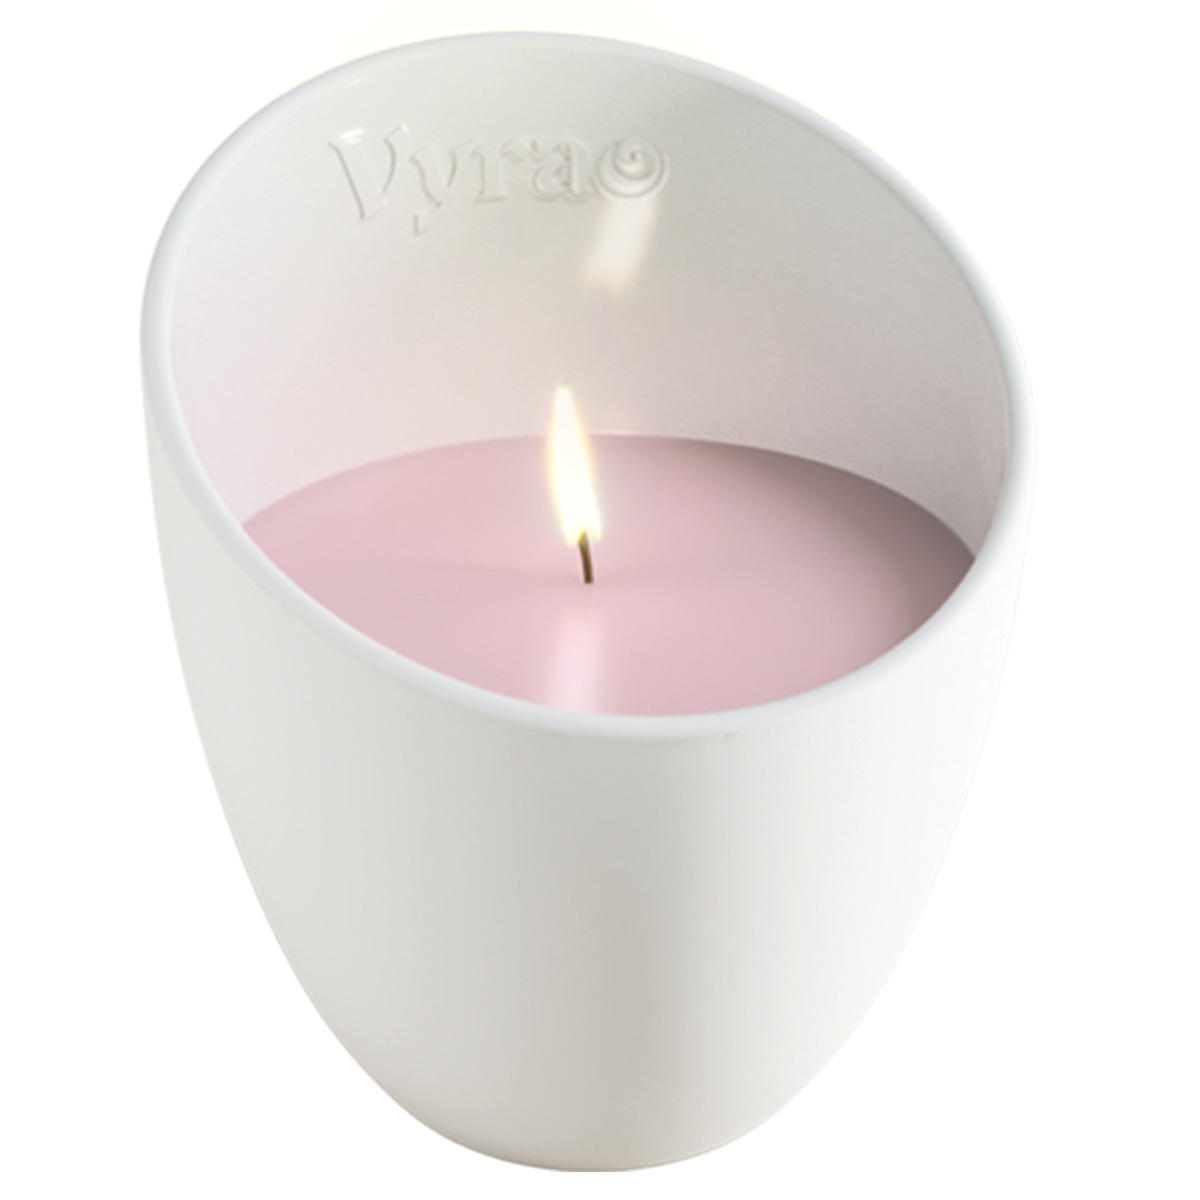 Vyrao ROSE MARIE CANDLE 170 g - 1